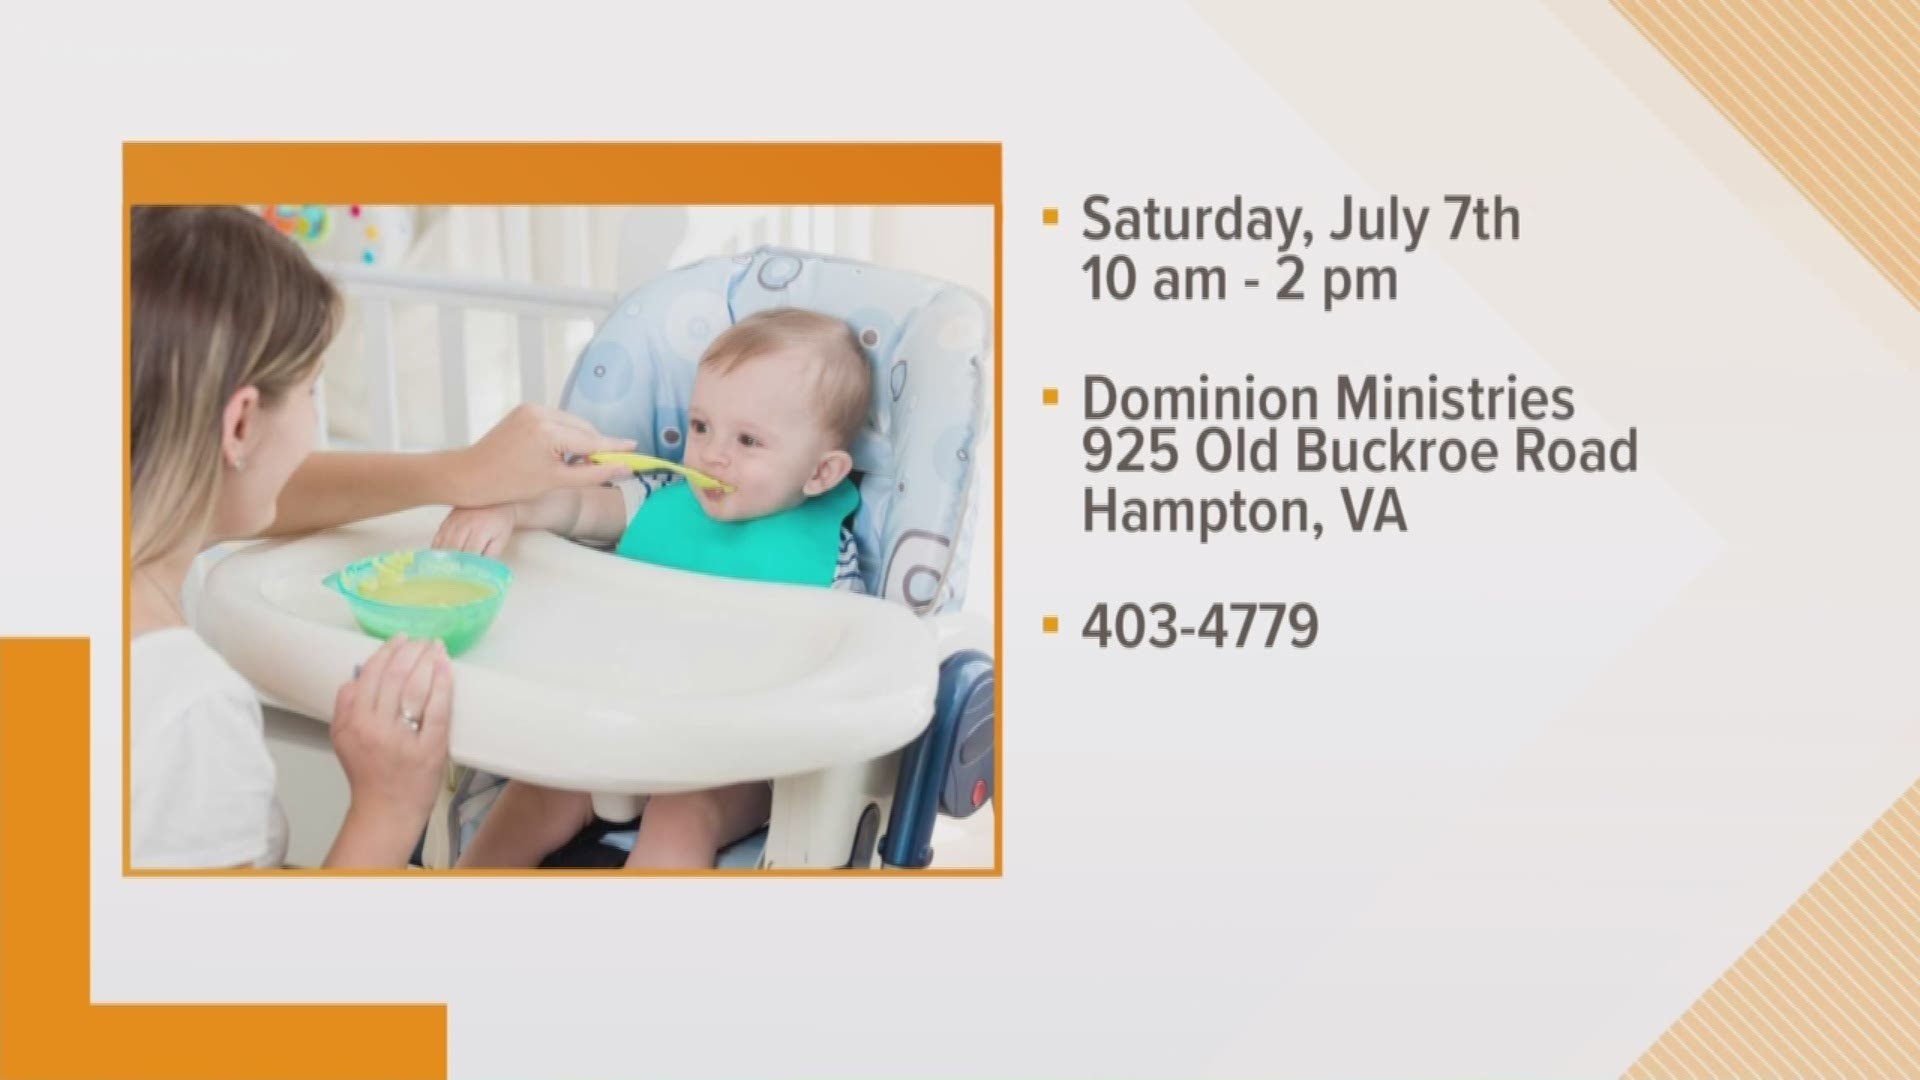 The nonprofit will hold the event Saturday, July 7, at Dominion Ministries, located at 925 Old Buckroe Road in Hampton, from 10 a.m. to 2 p.m.